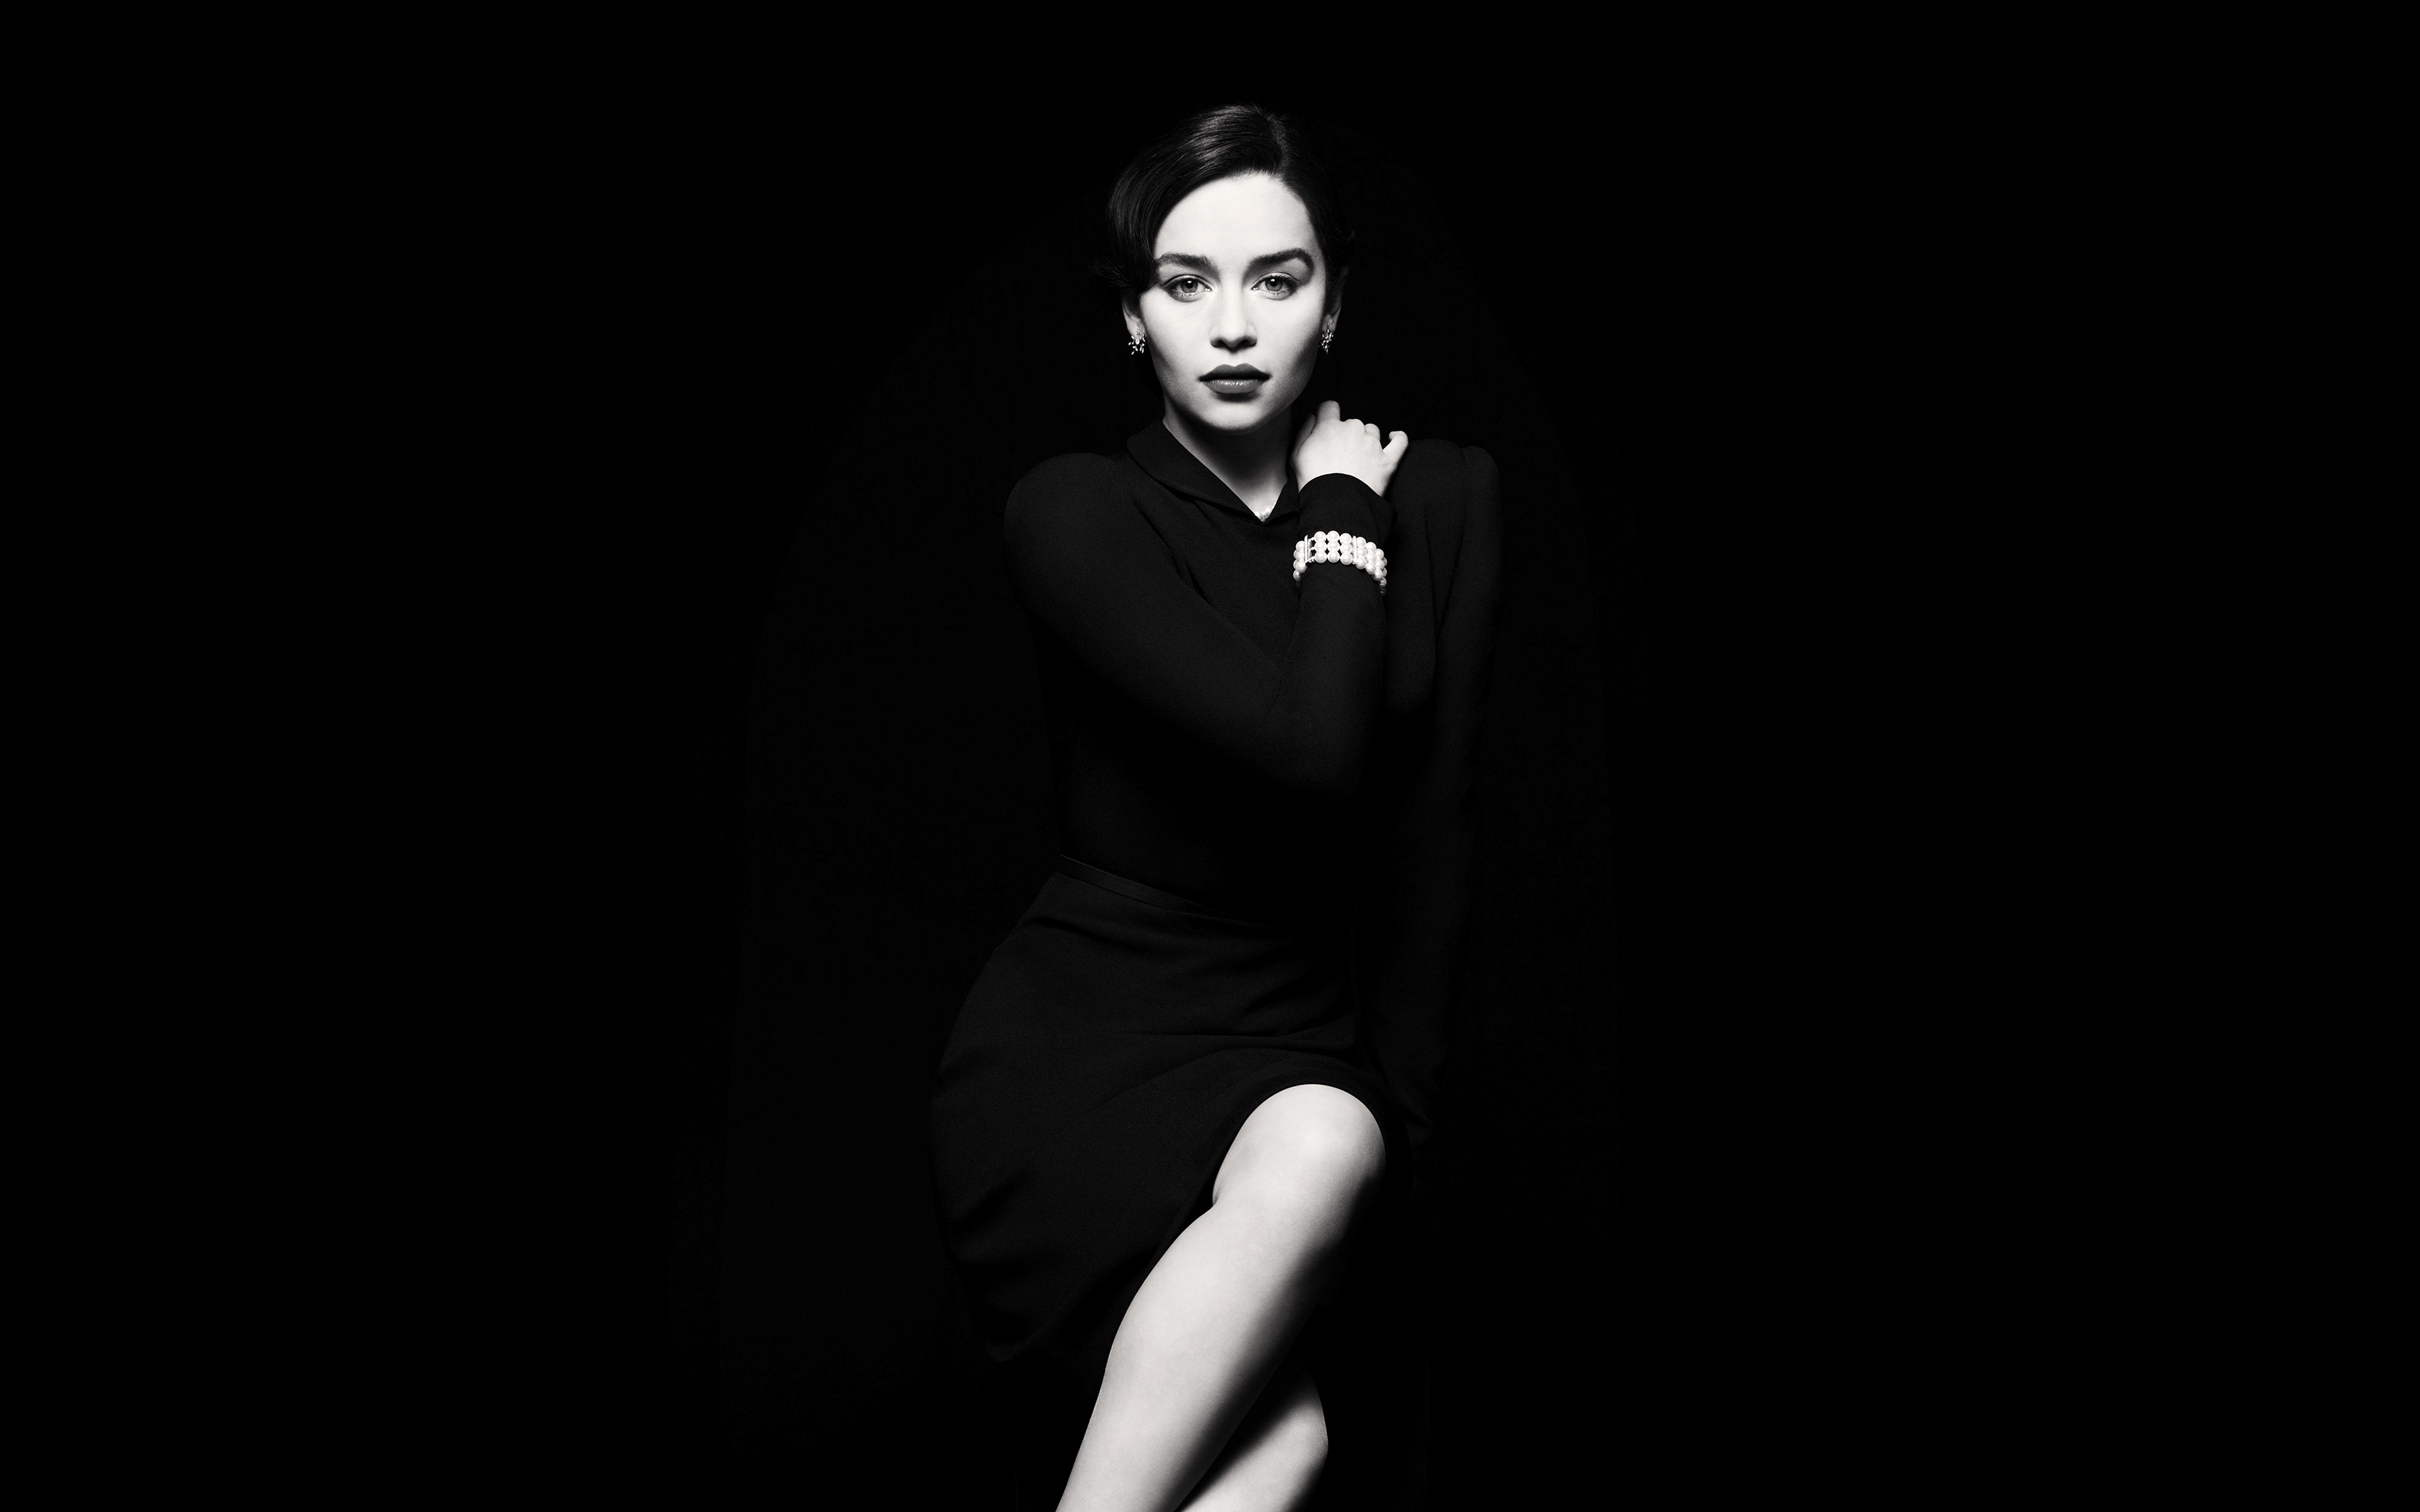 Wallpaper, women, simple background, brunette, looking at viewer, celebrity, actress, Gentleman, Emilia Clarke, glamour, entertainment, darkness, black and white, monochrome photography, performing arts 3840x2400